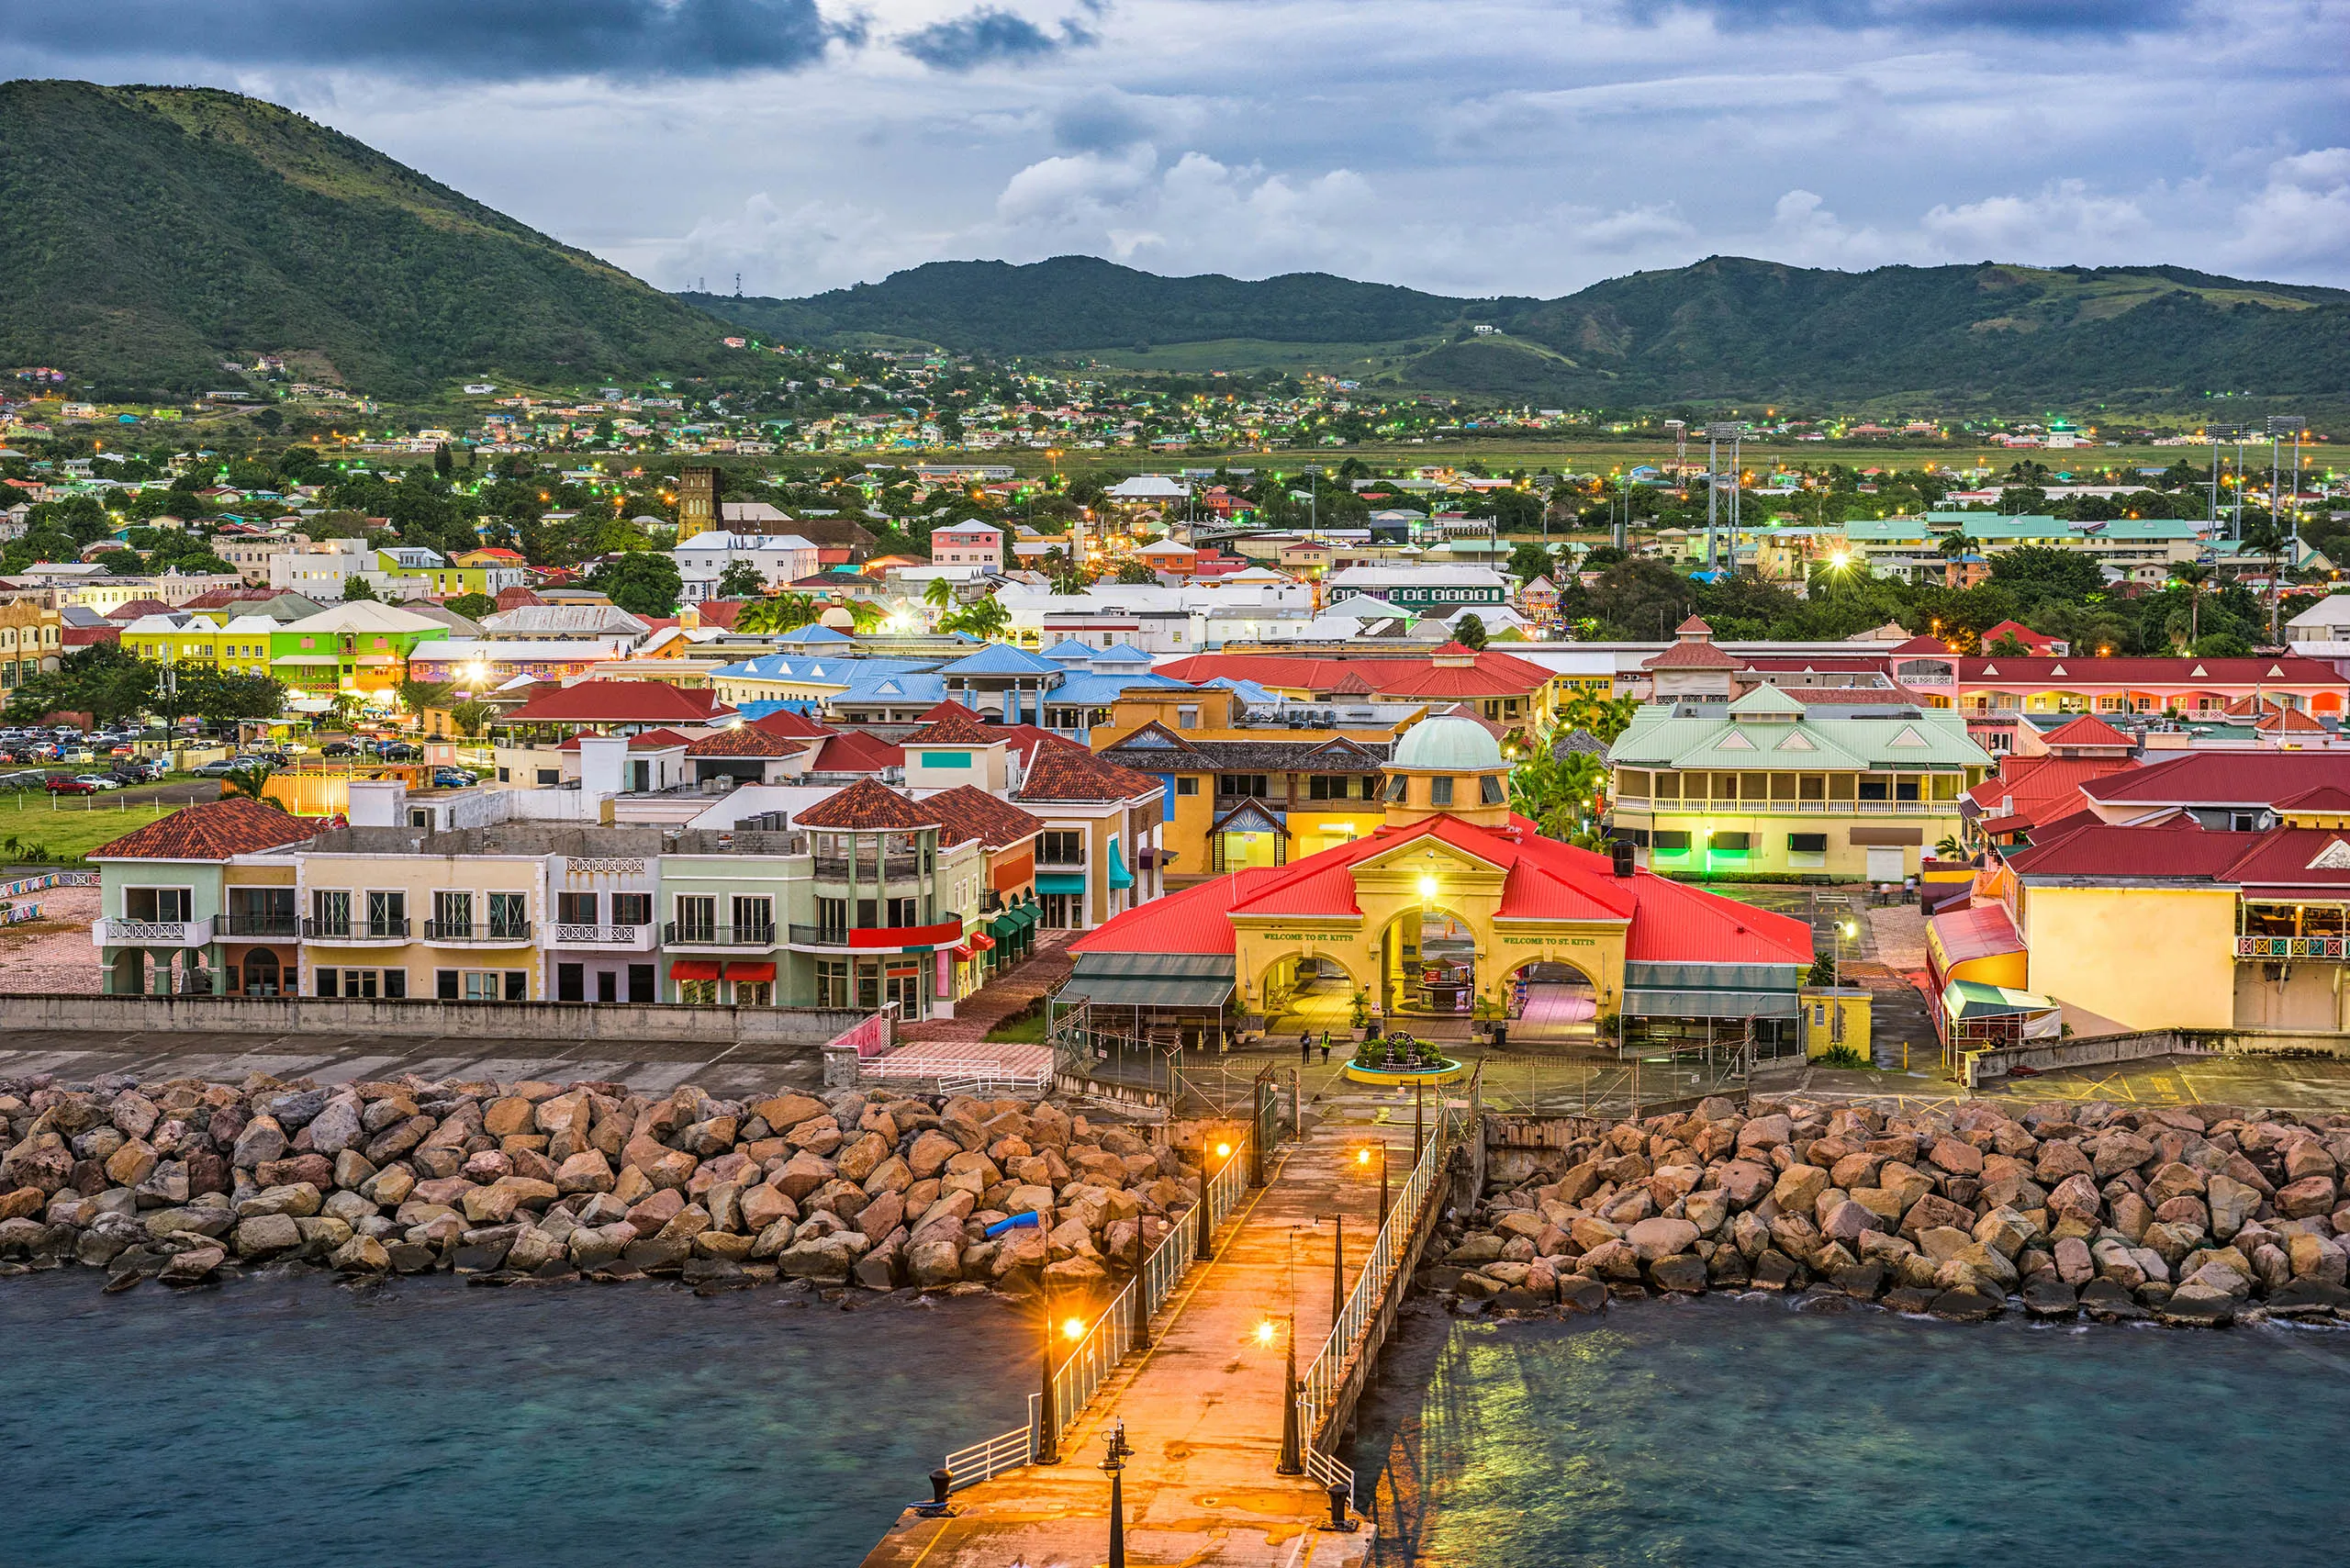 Saint Kitts and Nevis - Rated 3.8